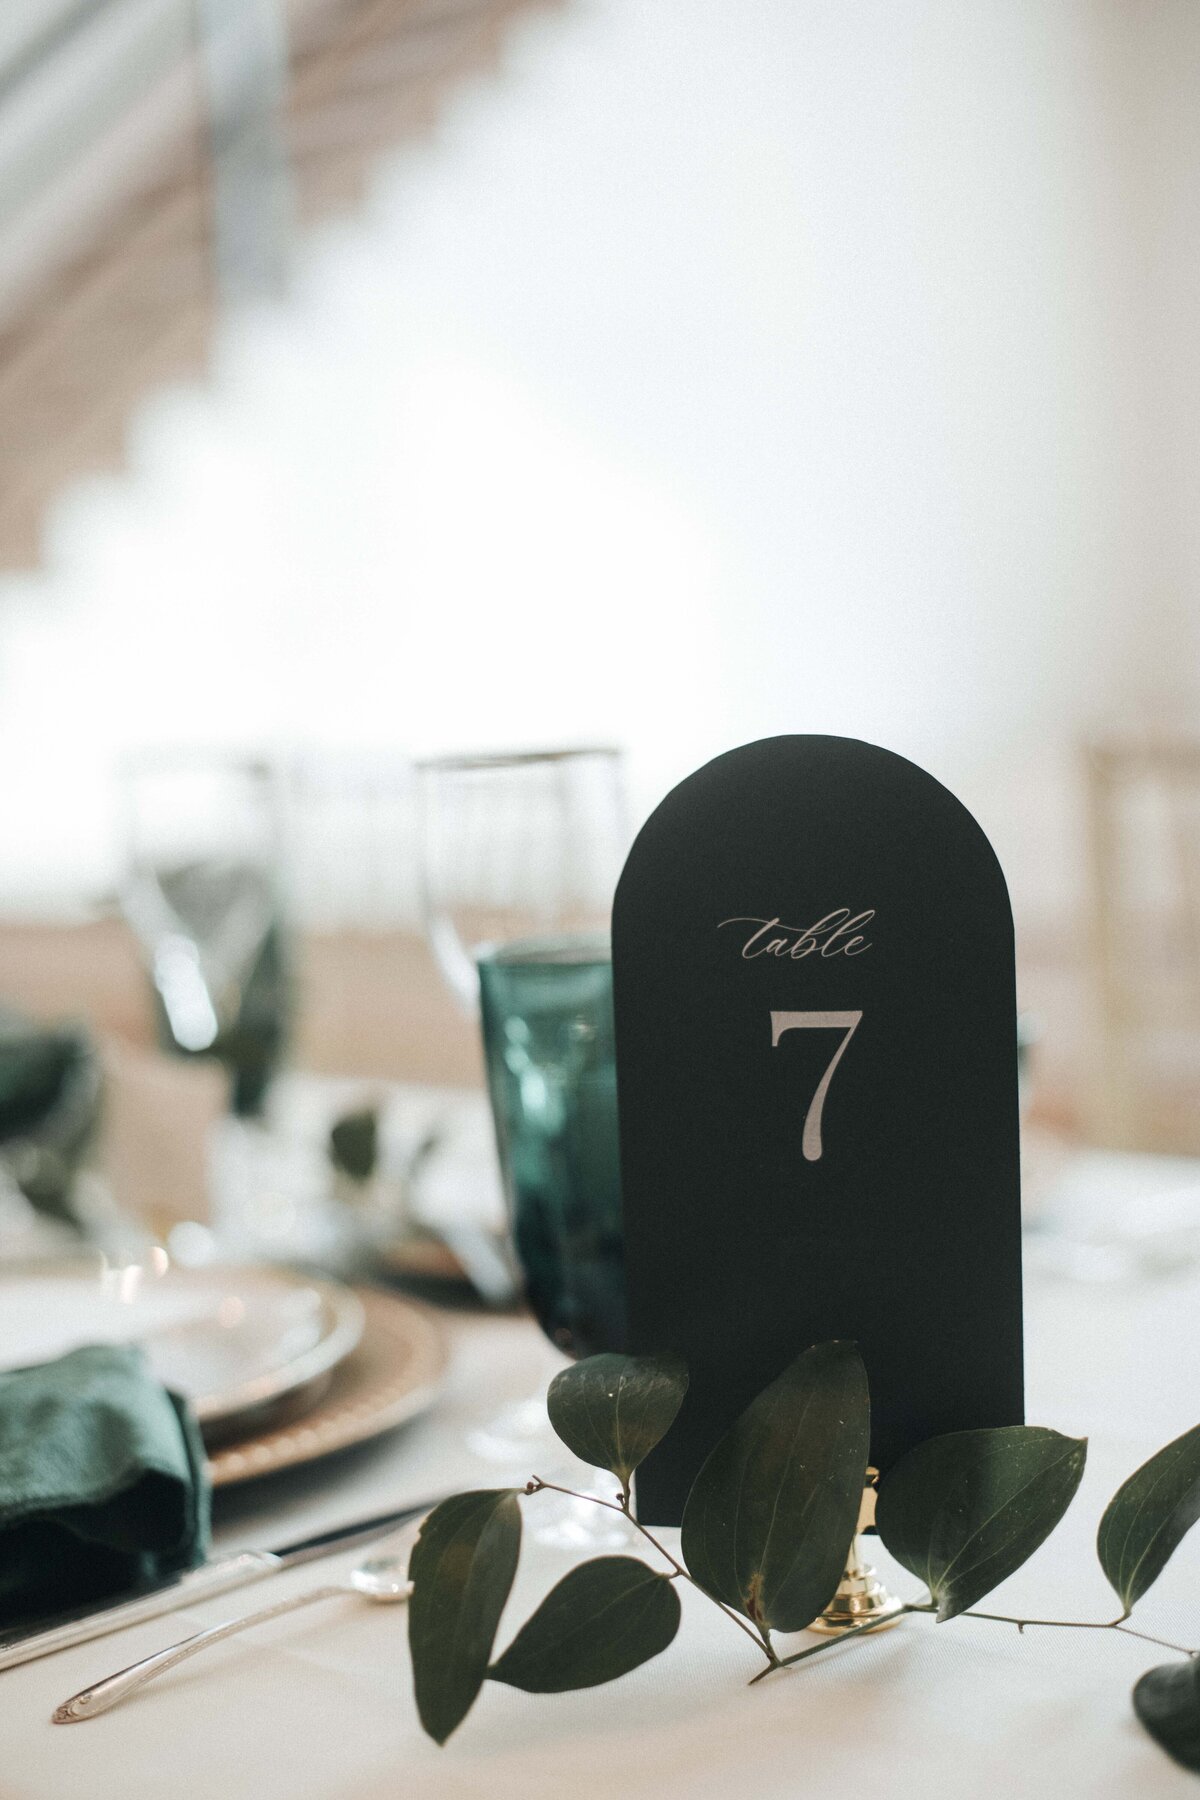 Rounded dark green place card with ivory cursive font on a gold place card holder’ set atop reception table.